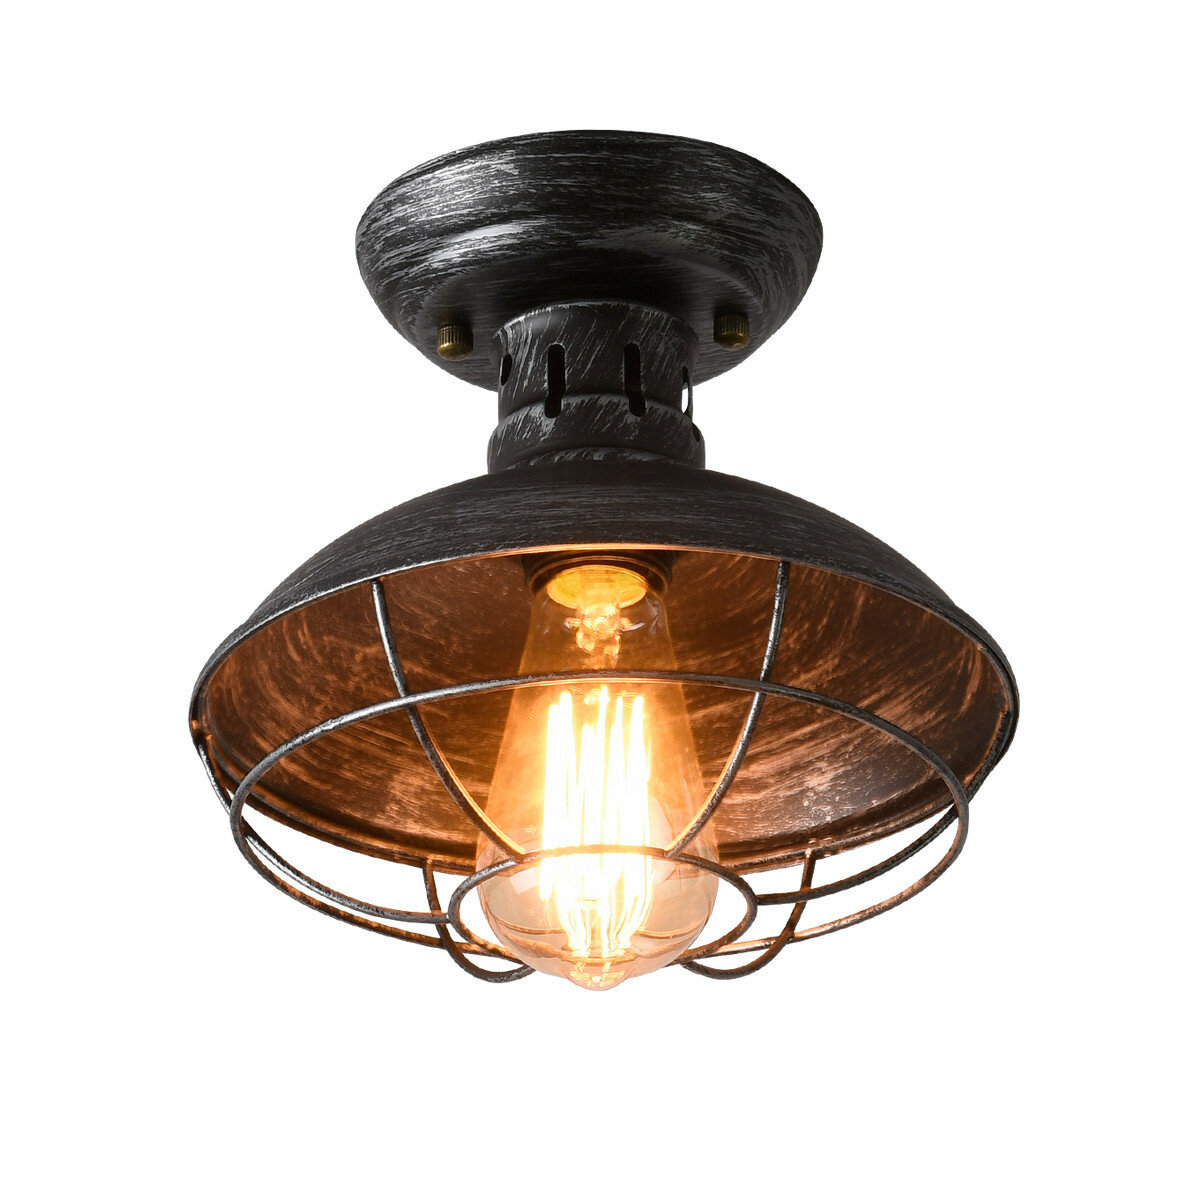 Retro Industrial Pendant Light Vintage Ceiling Lamp Hanging Fixture Office/Home Without Bulb